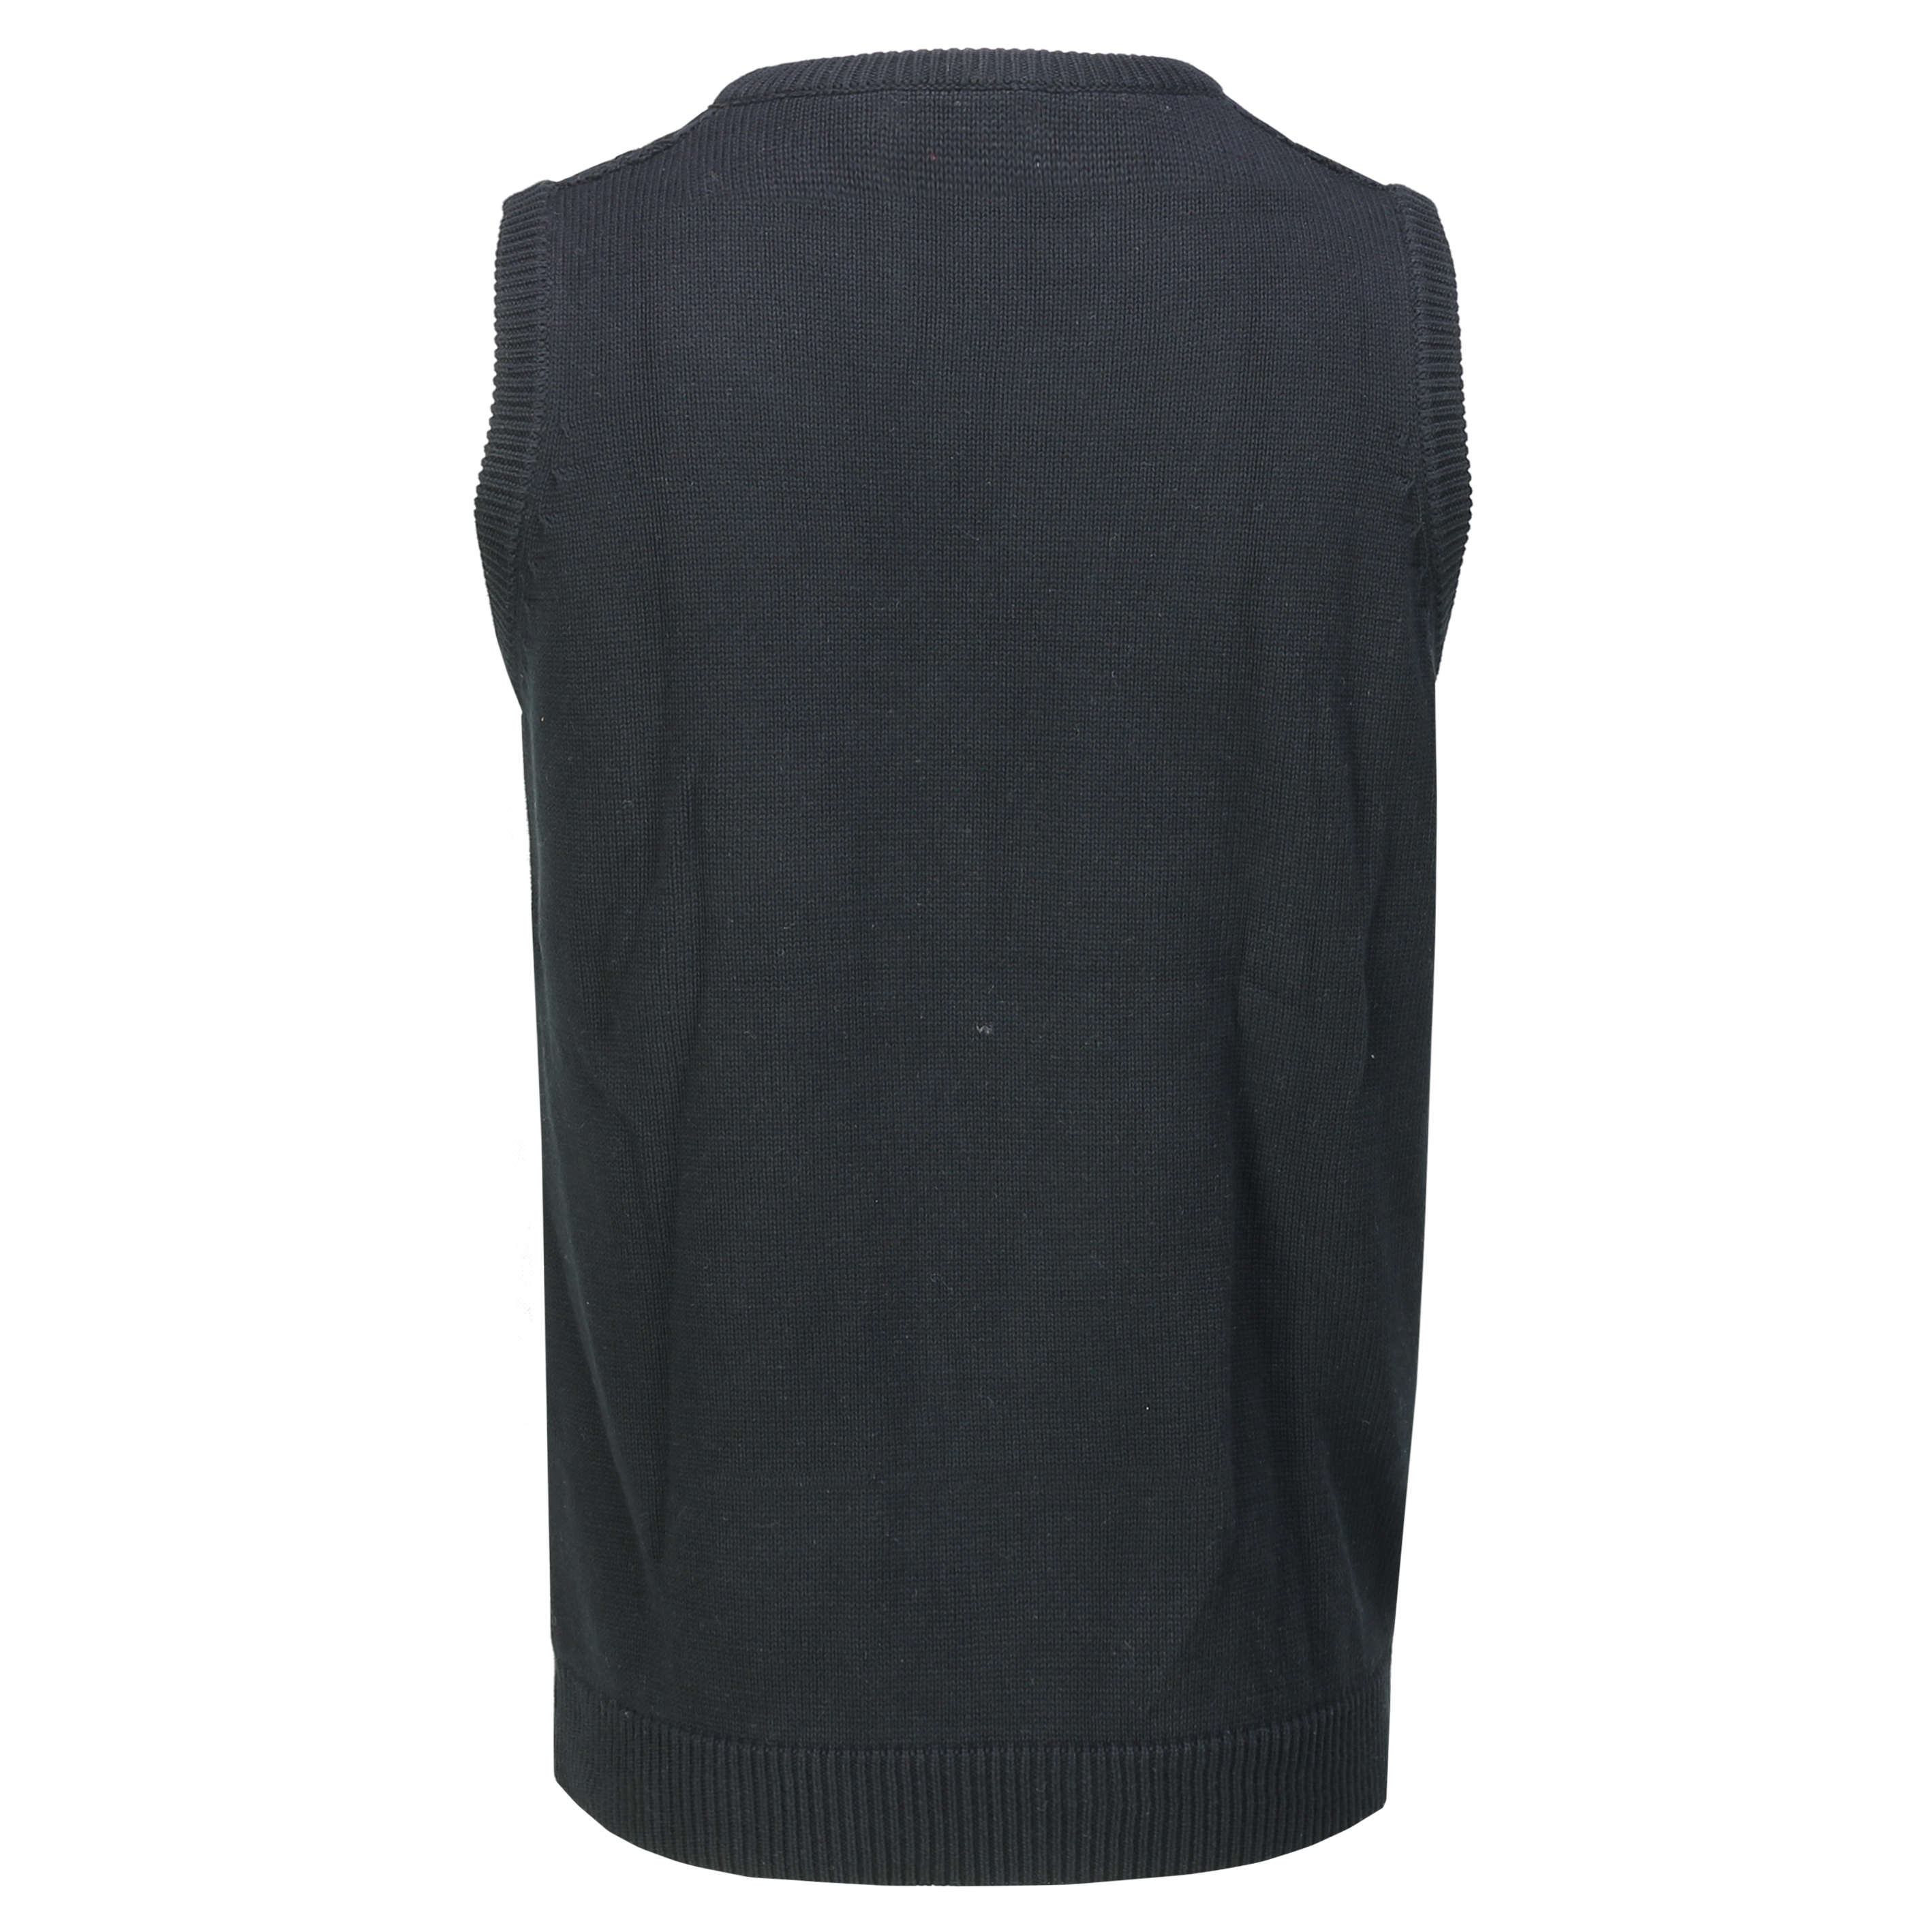 Classic Sleeveless V Neck Black Jumper Cable Knitted